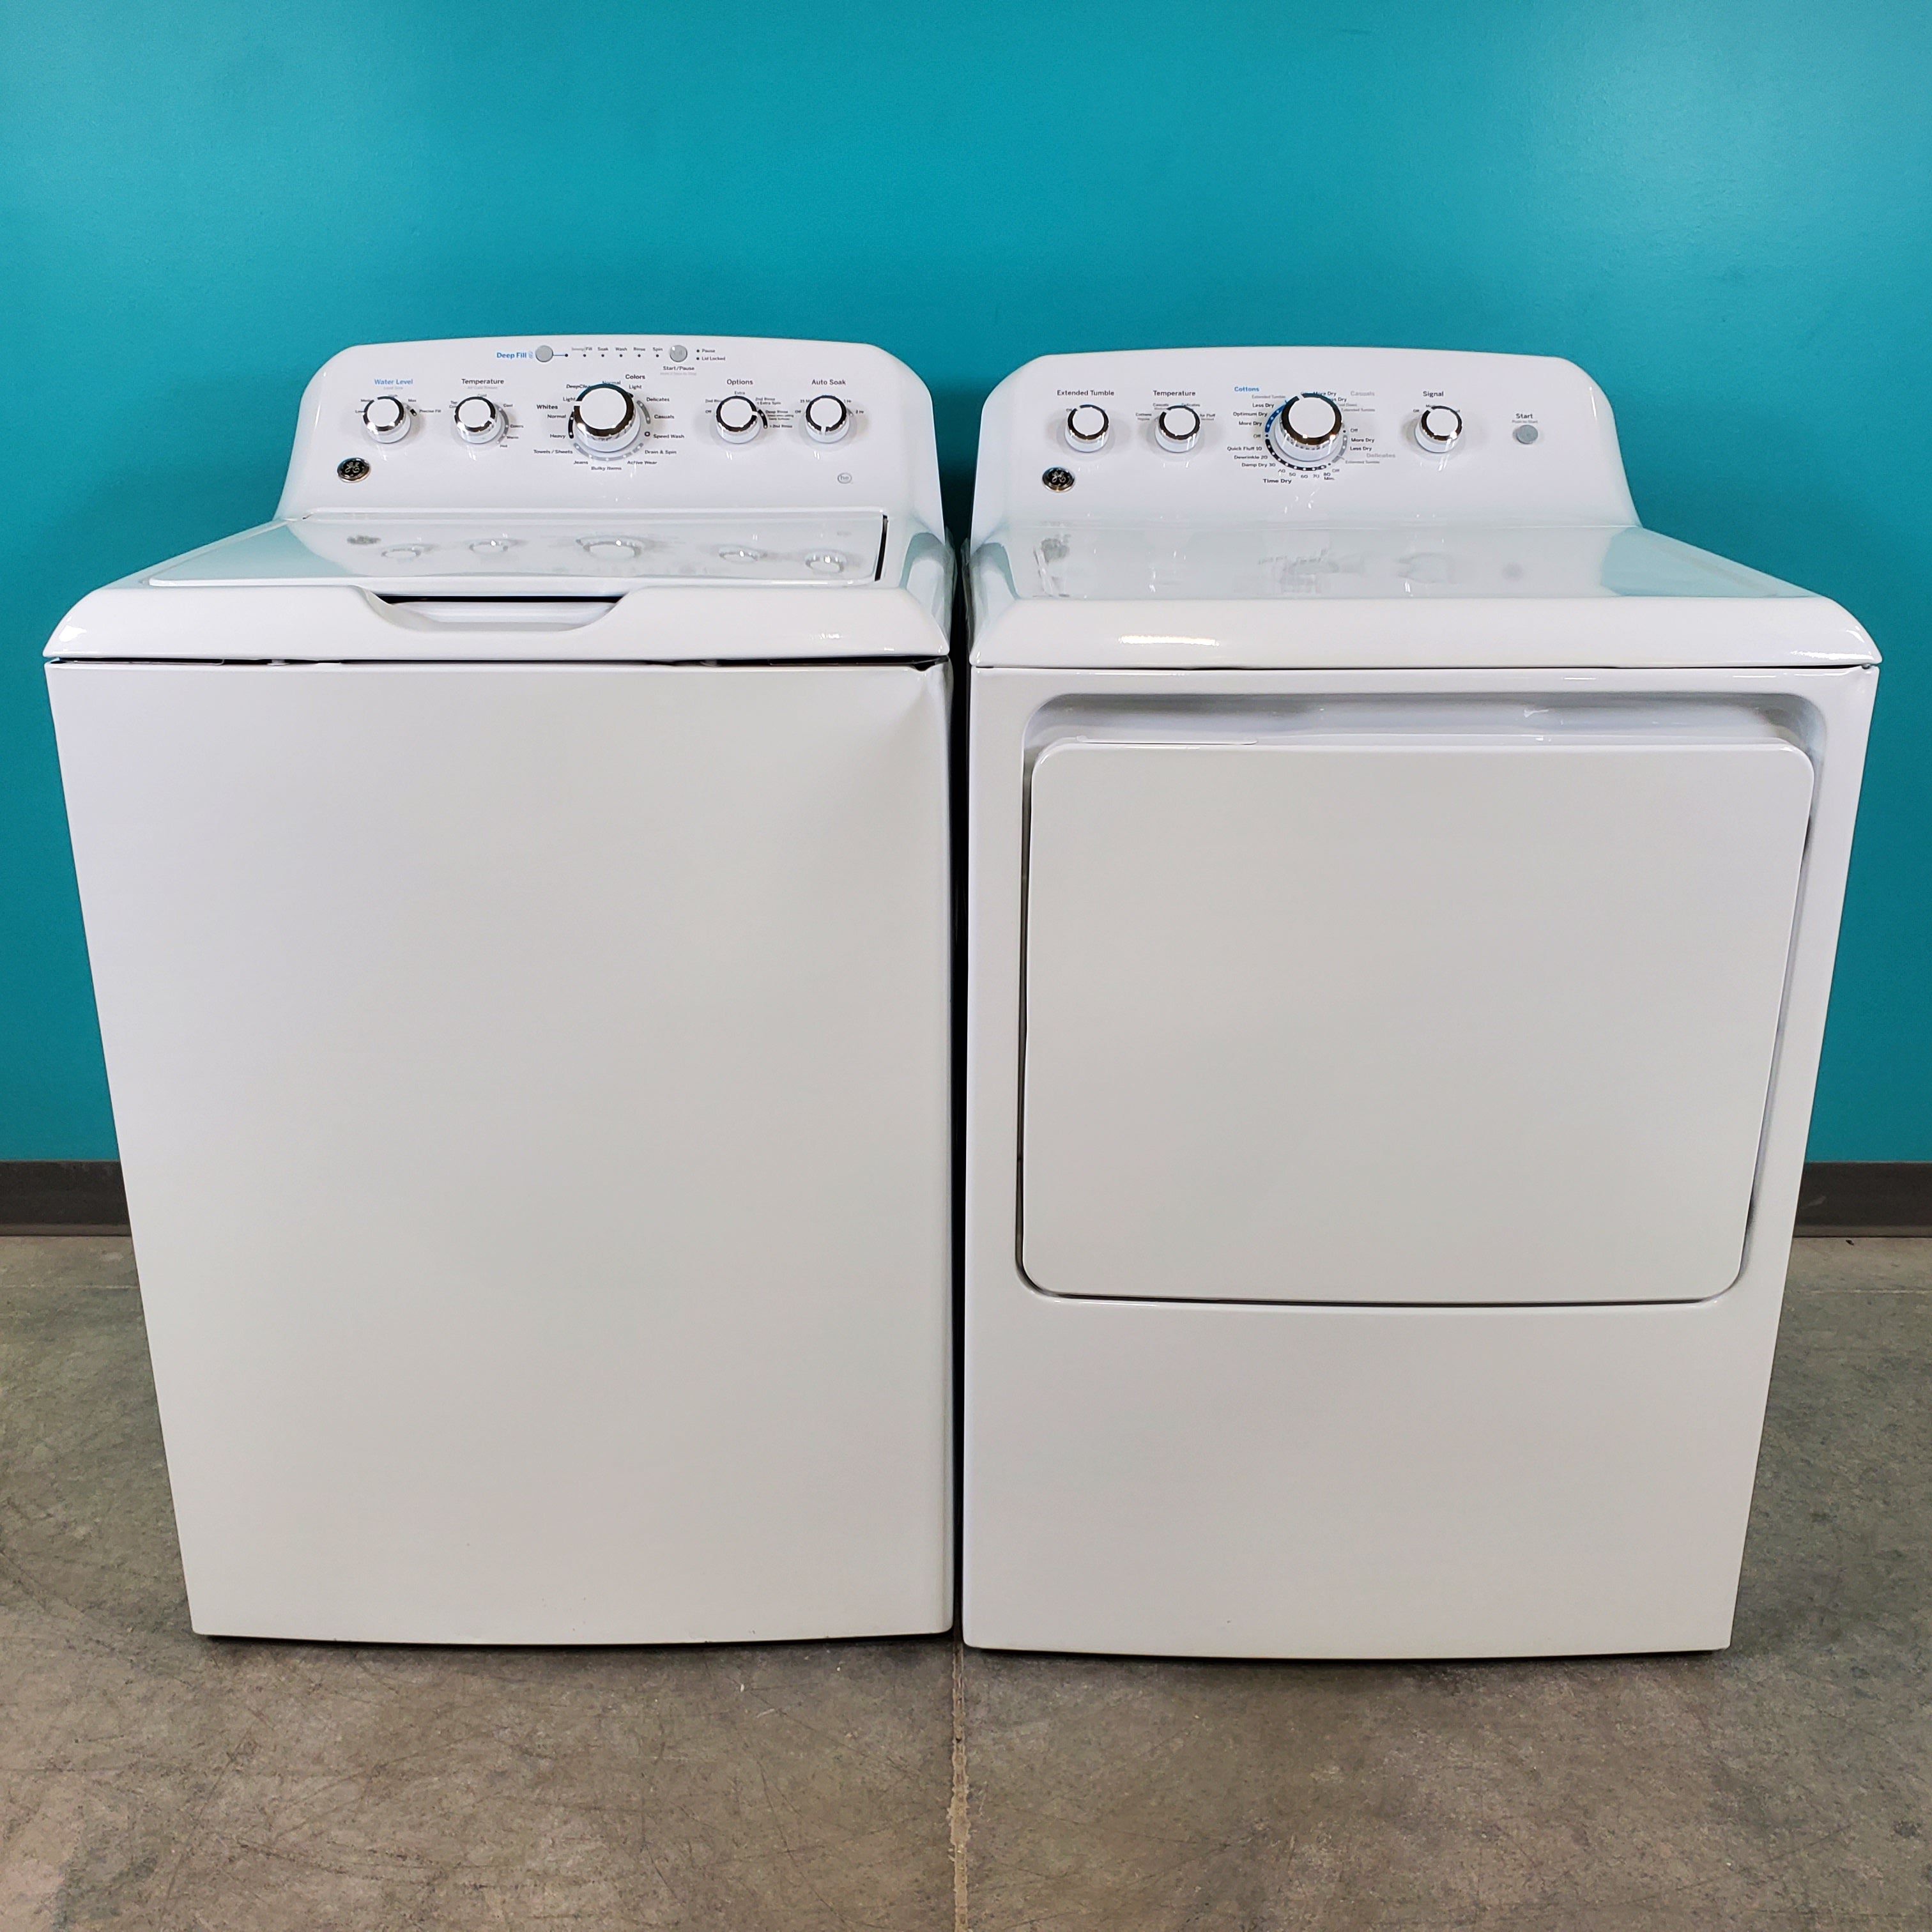 Pictures of Neu Select GE High Capacity Agitator Washer & Electric Dryer Set: 4.5 cu. ft. High Capacity Agitator Washer With Extra Water Cycle / Option & 7.2 cu. ft. Electric 220v Dryer With Auto Sensor Dry - Certified Refurbished - Neu Appliance Outlet - Discount Appliance Outlet in Austin, Tx